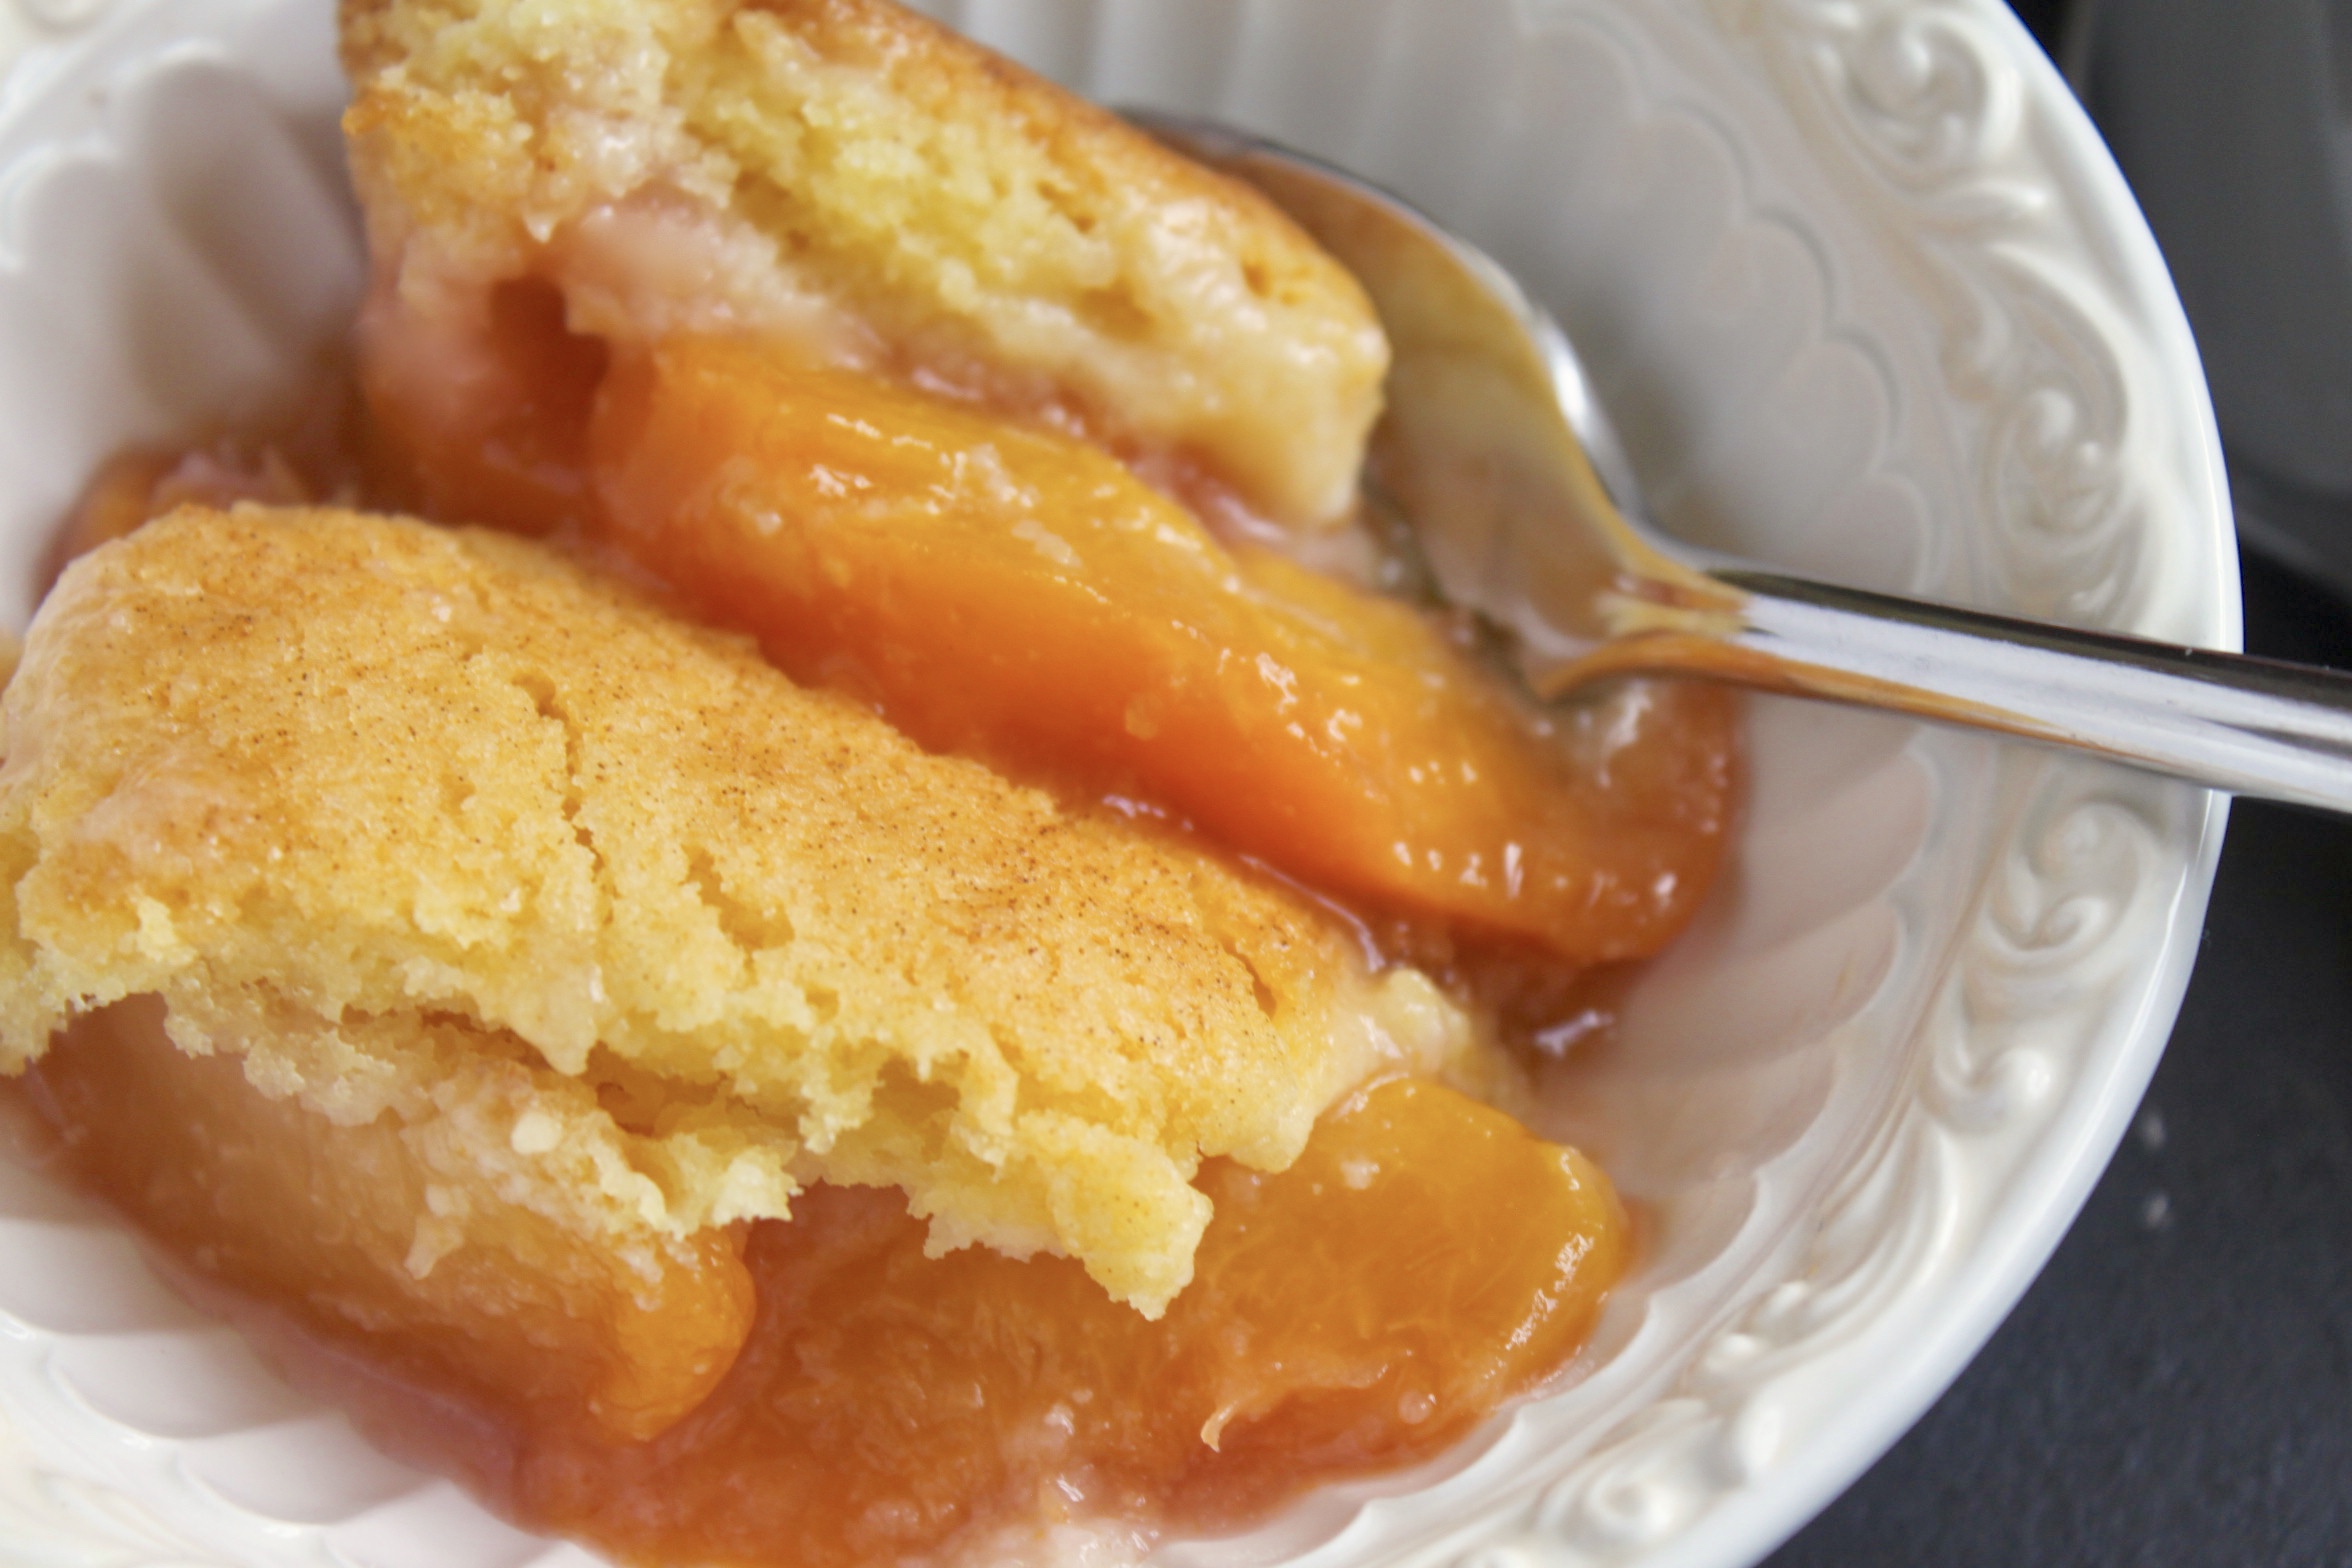 Easy Peach Cobbler (Using Fresh, Frozen or Canned Peaches) - Christina ...